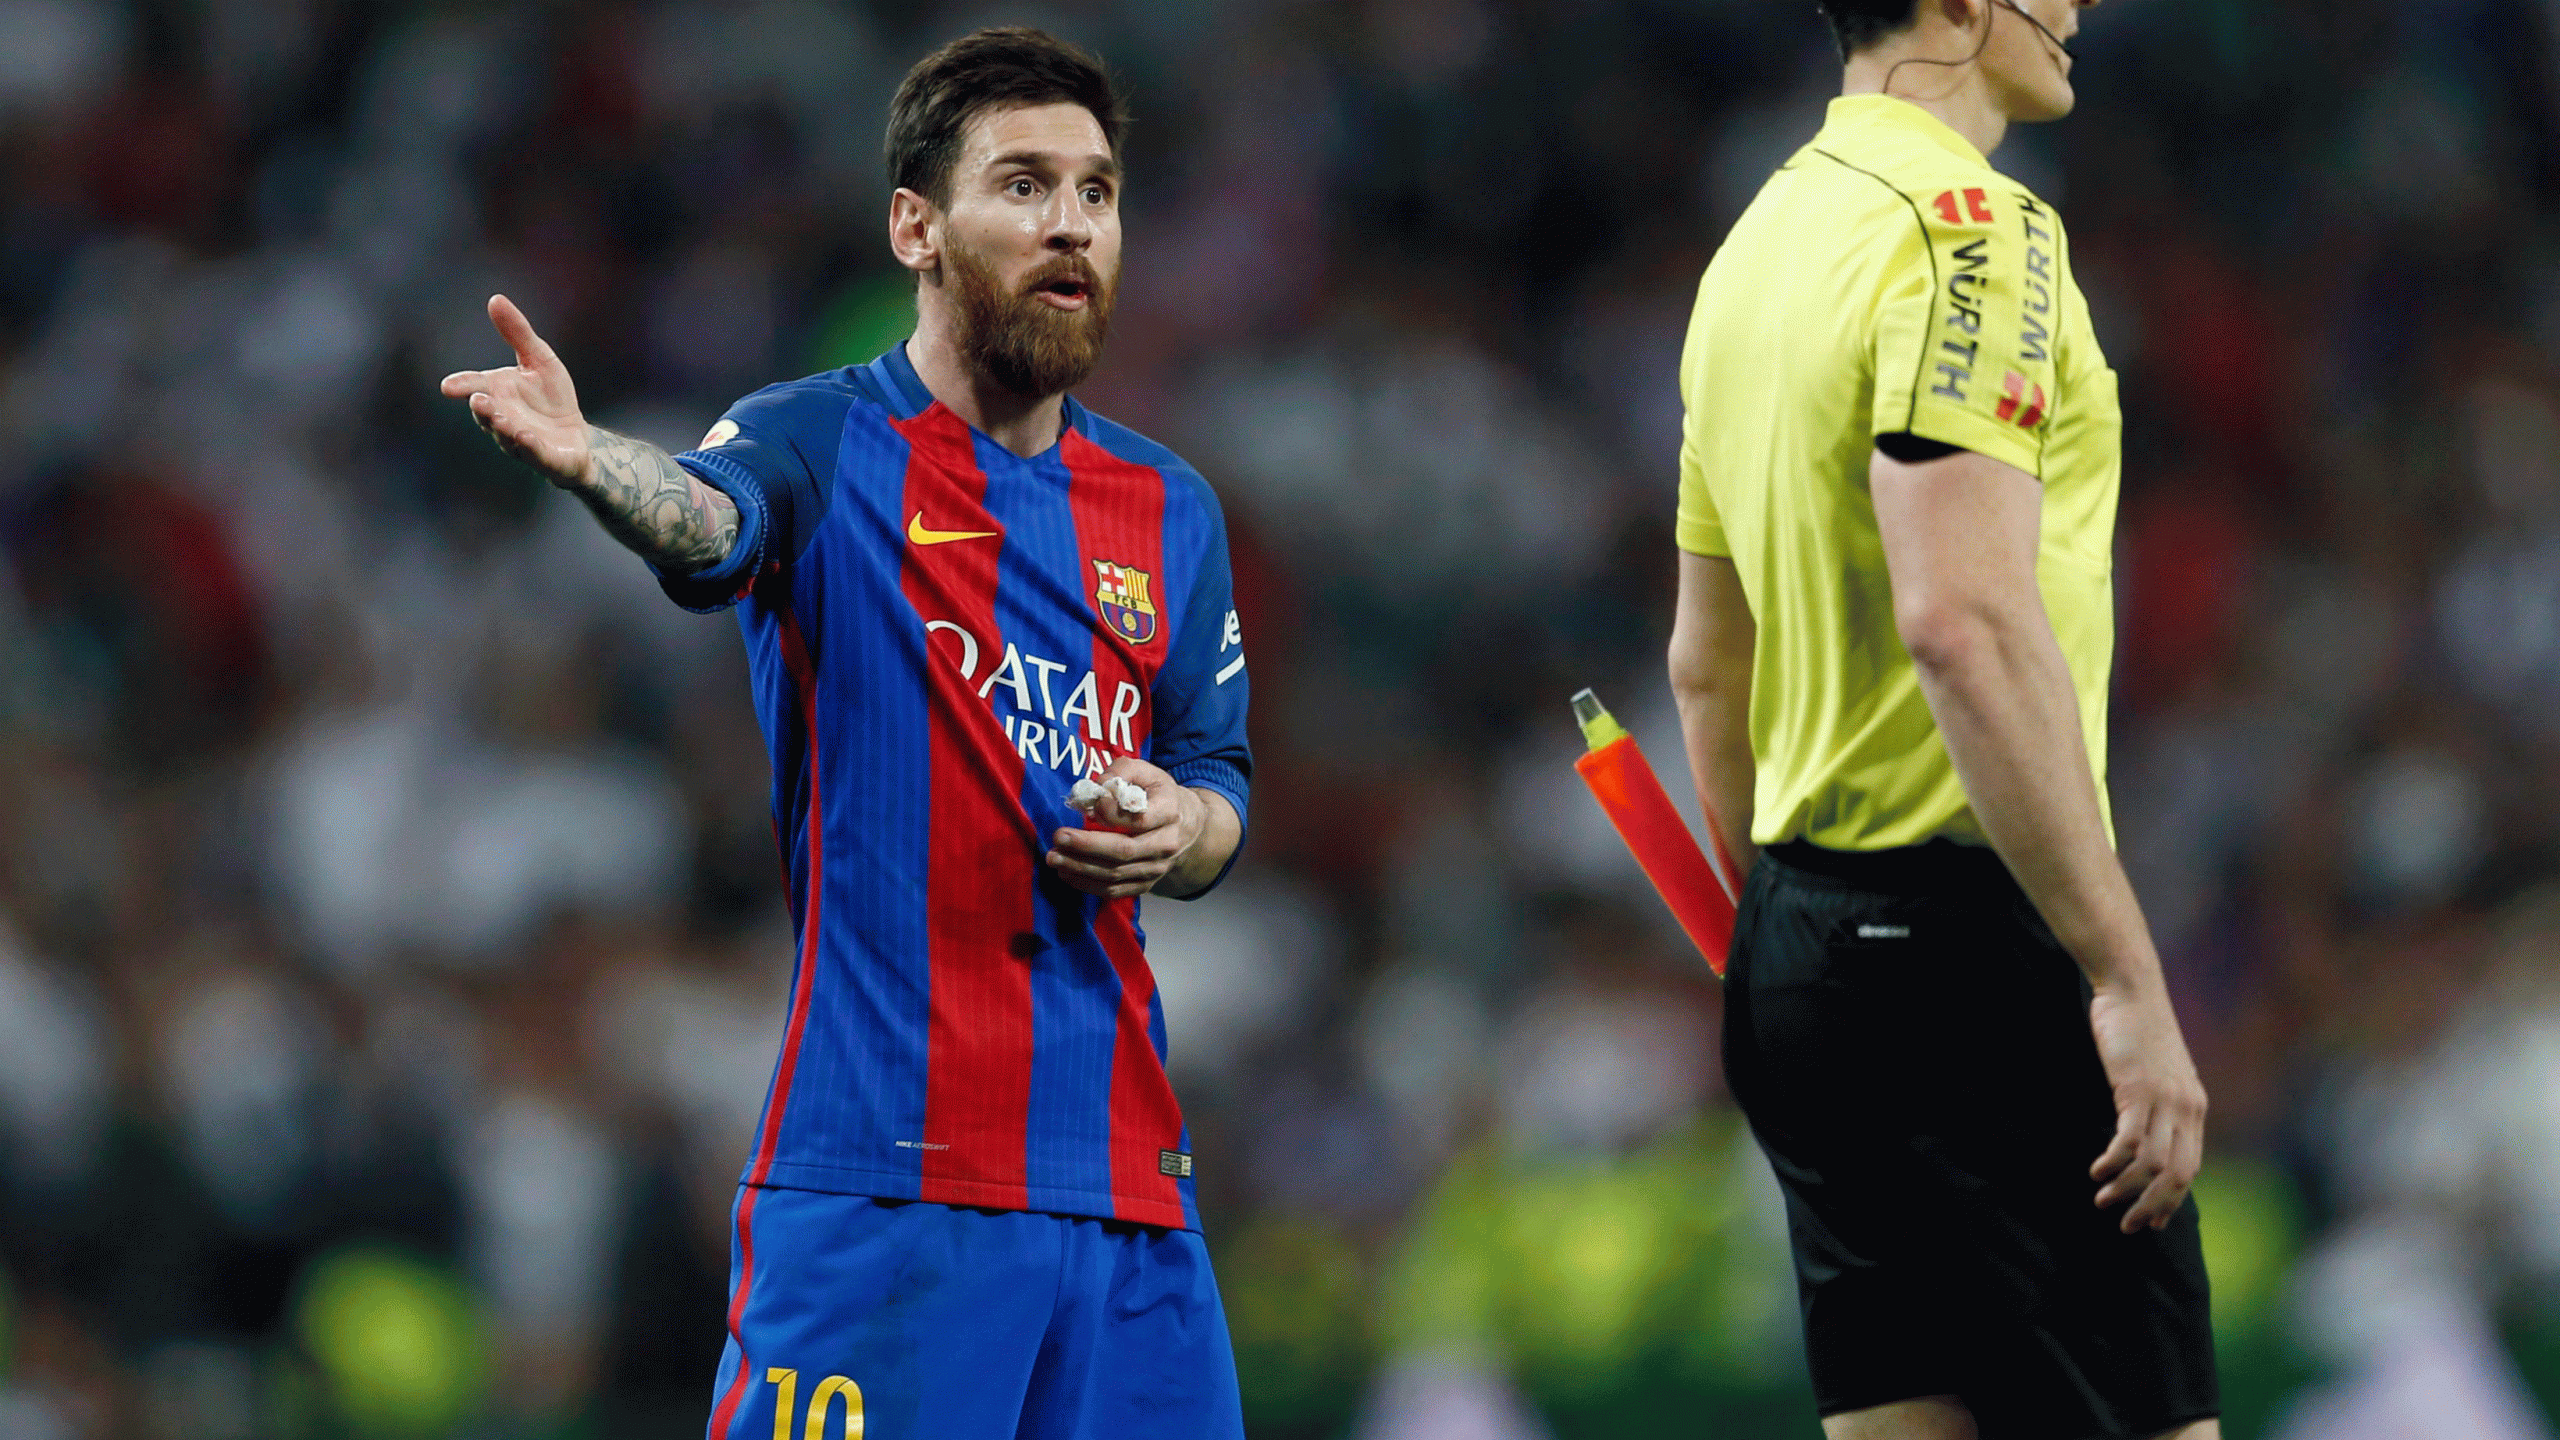 Lionel Messi appeals 4-match World Cup qualifying ban - Sportsnet.ca